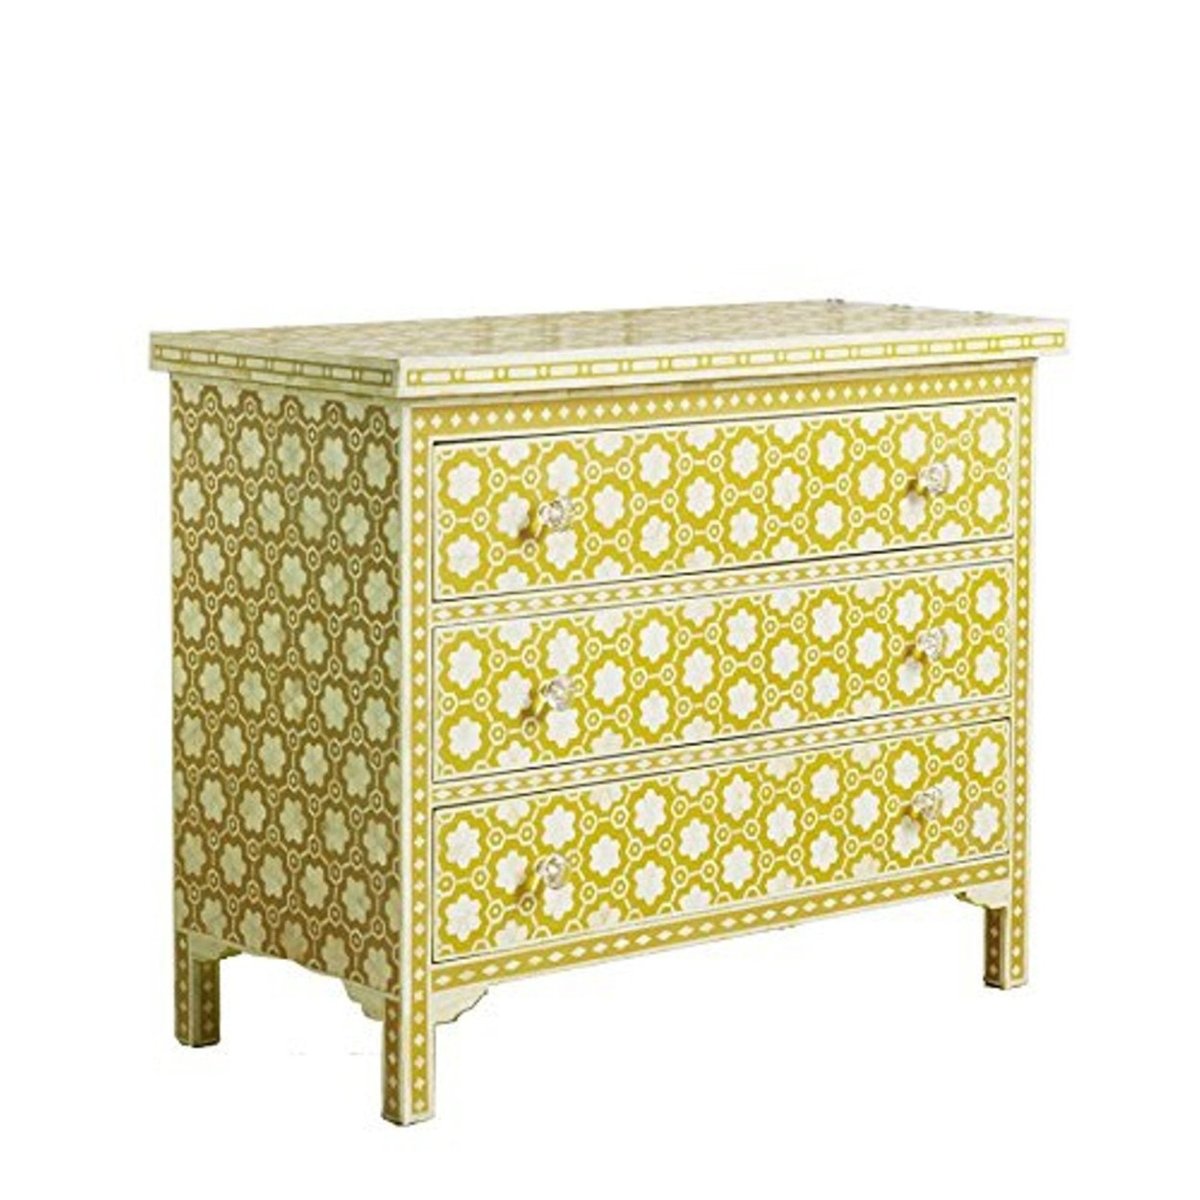 Handmade Bone Inlay Chest of 3 Drawers Floral Design in Yellow Color | Bedroom 3 Drawers Dresser chest of drawer - Bone Inlay Furnitures